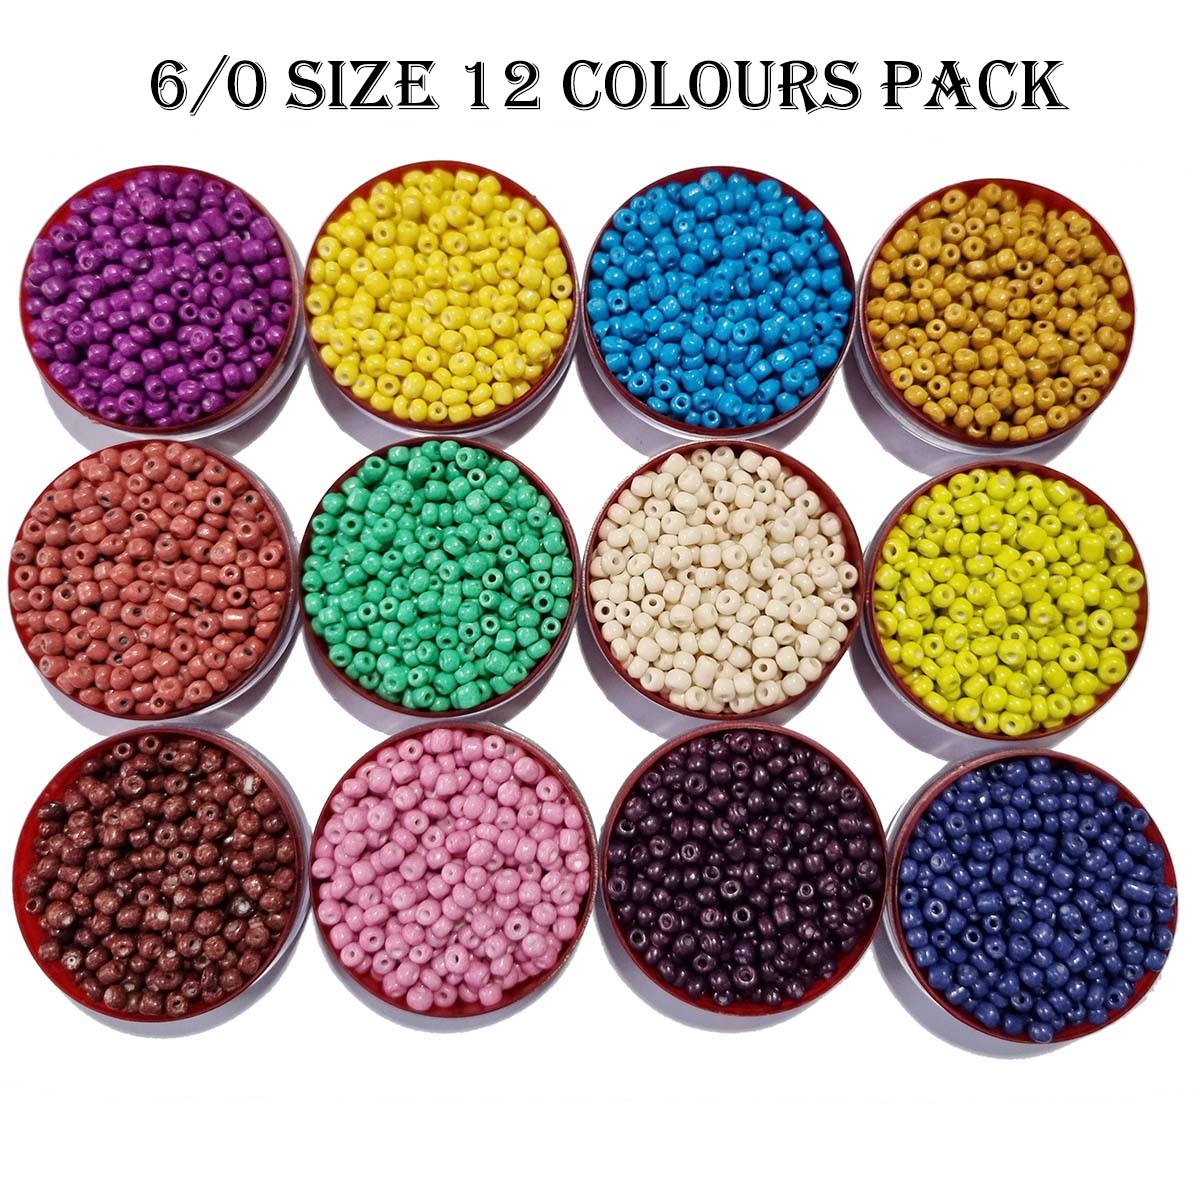 Craftdady 6/0 Glass Seed Beads 4mm About 4500pcs Transparent Silver Lined Small Round Pony Loose Spacer Beads Random Mixed Colors for Jewelry Making